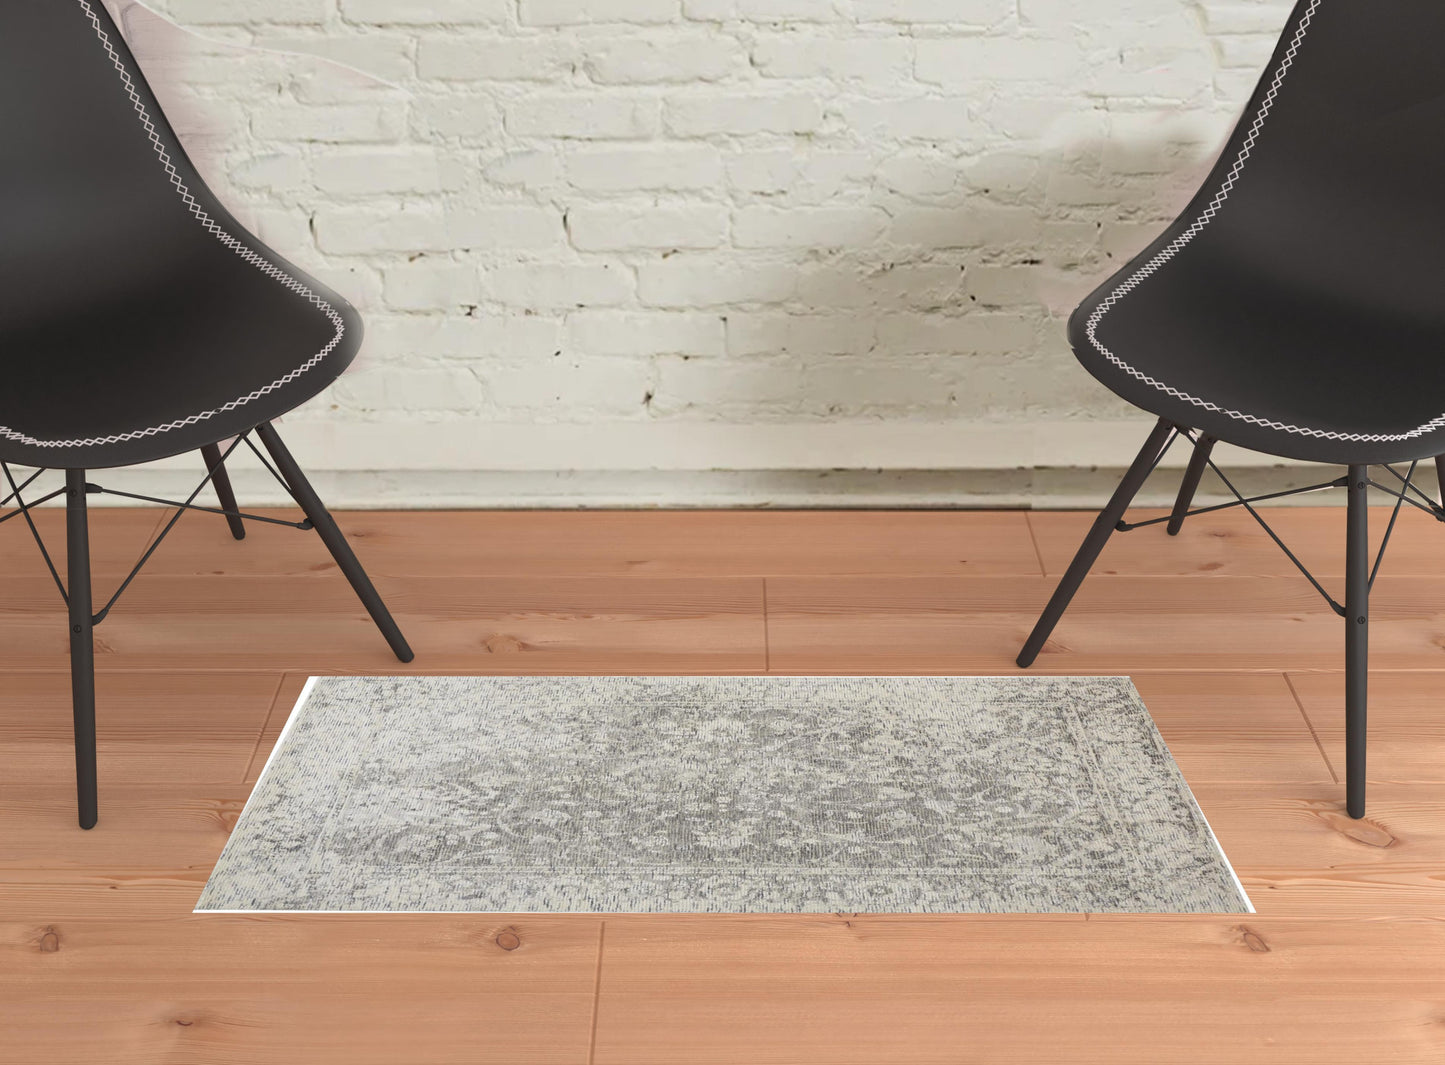 8' X 11' Ivory And Tan Abstract Hand Woven Area Rug